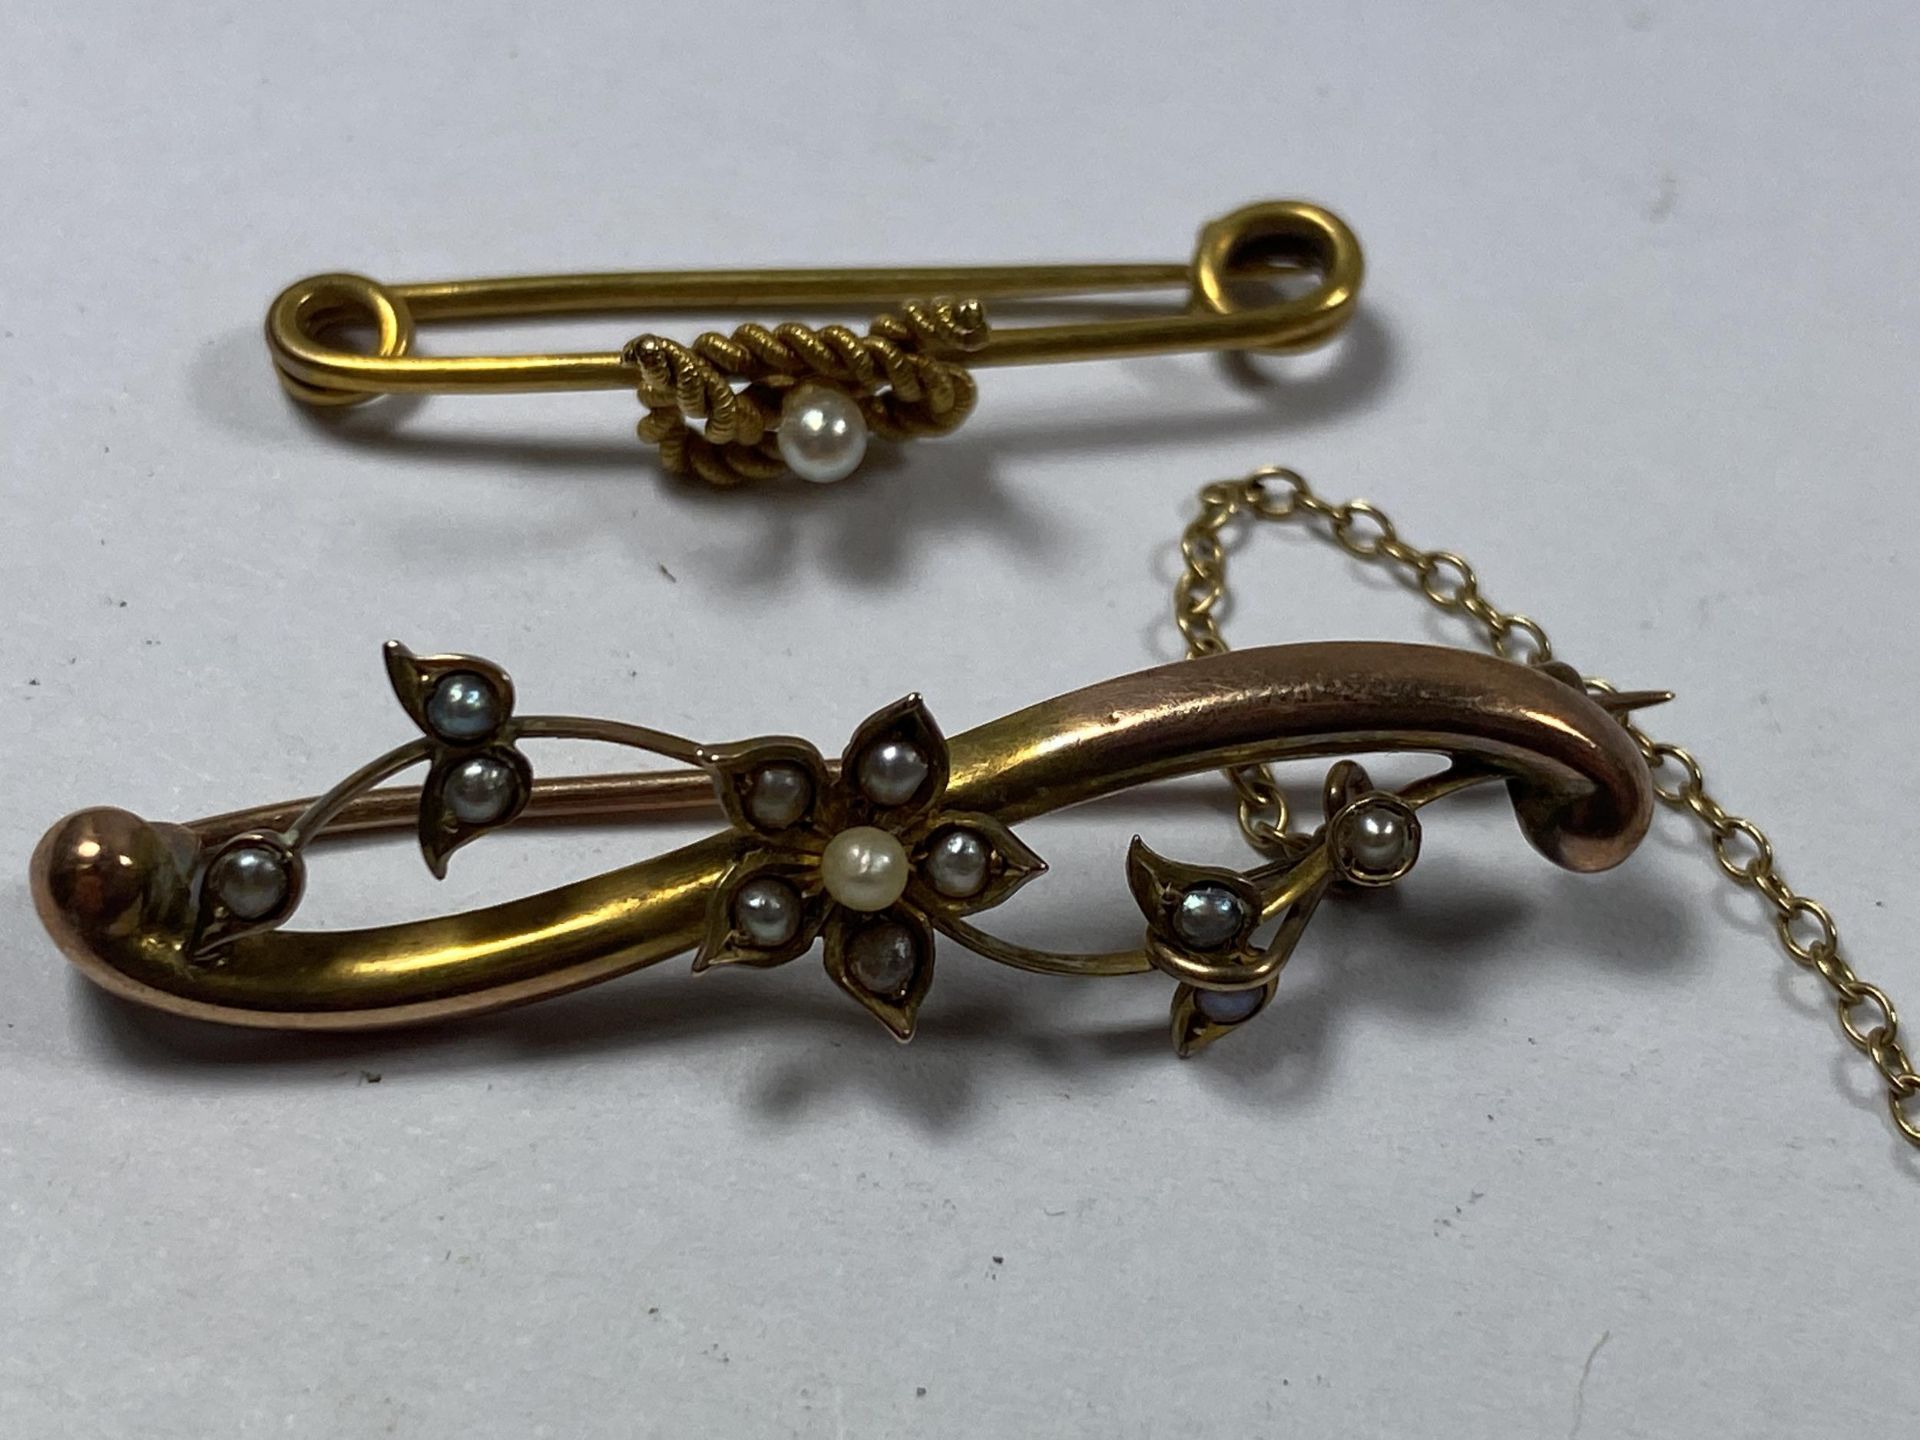 A 9CT YELLOW GOLD FLORAL BROOCH & FURTHER UNMARKED KNOT DESIGN BROOCH, GOLD BROOCH WEIGHT 2.5G - Image 3 of 6